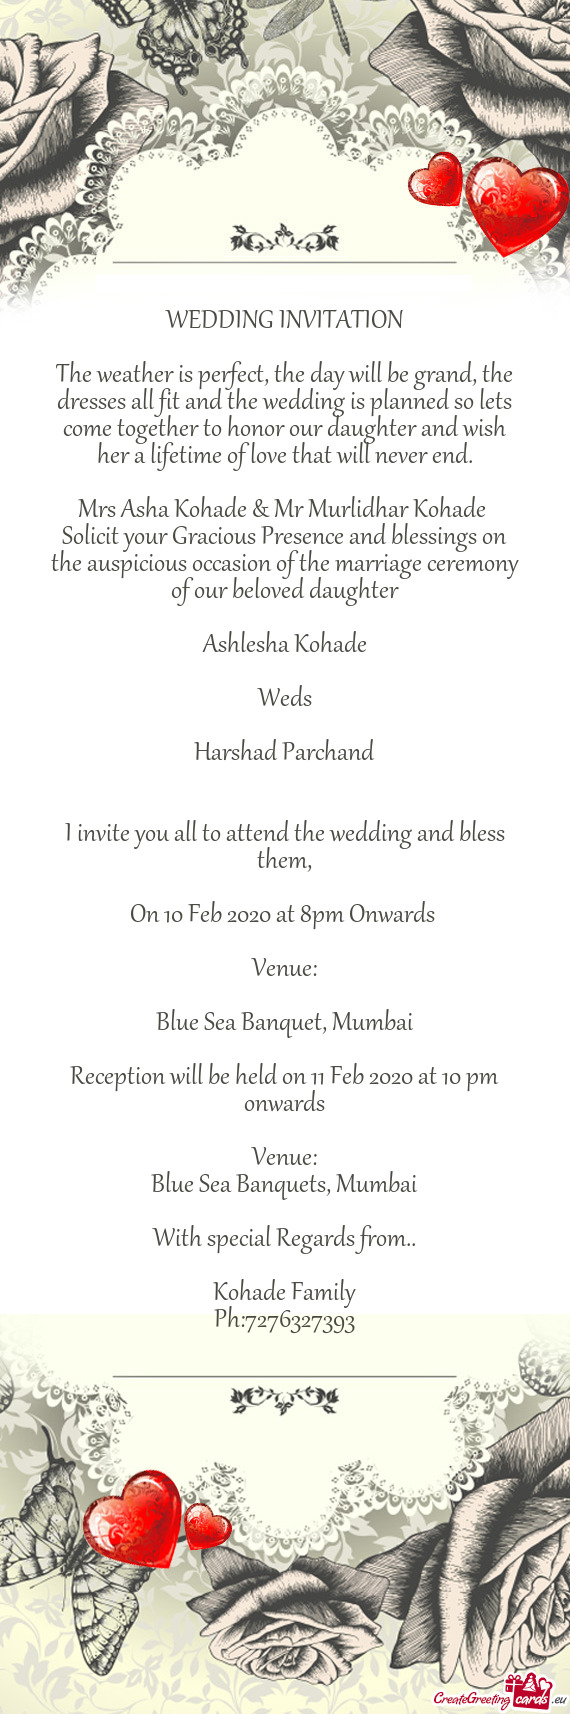 Solicit your Gracious Presence and blessings on the auspicious occasion of the marriage ceremony of